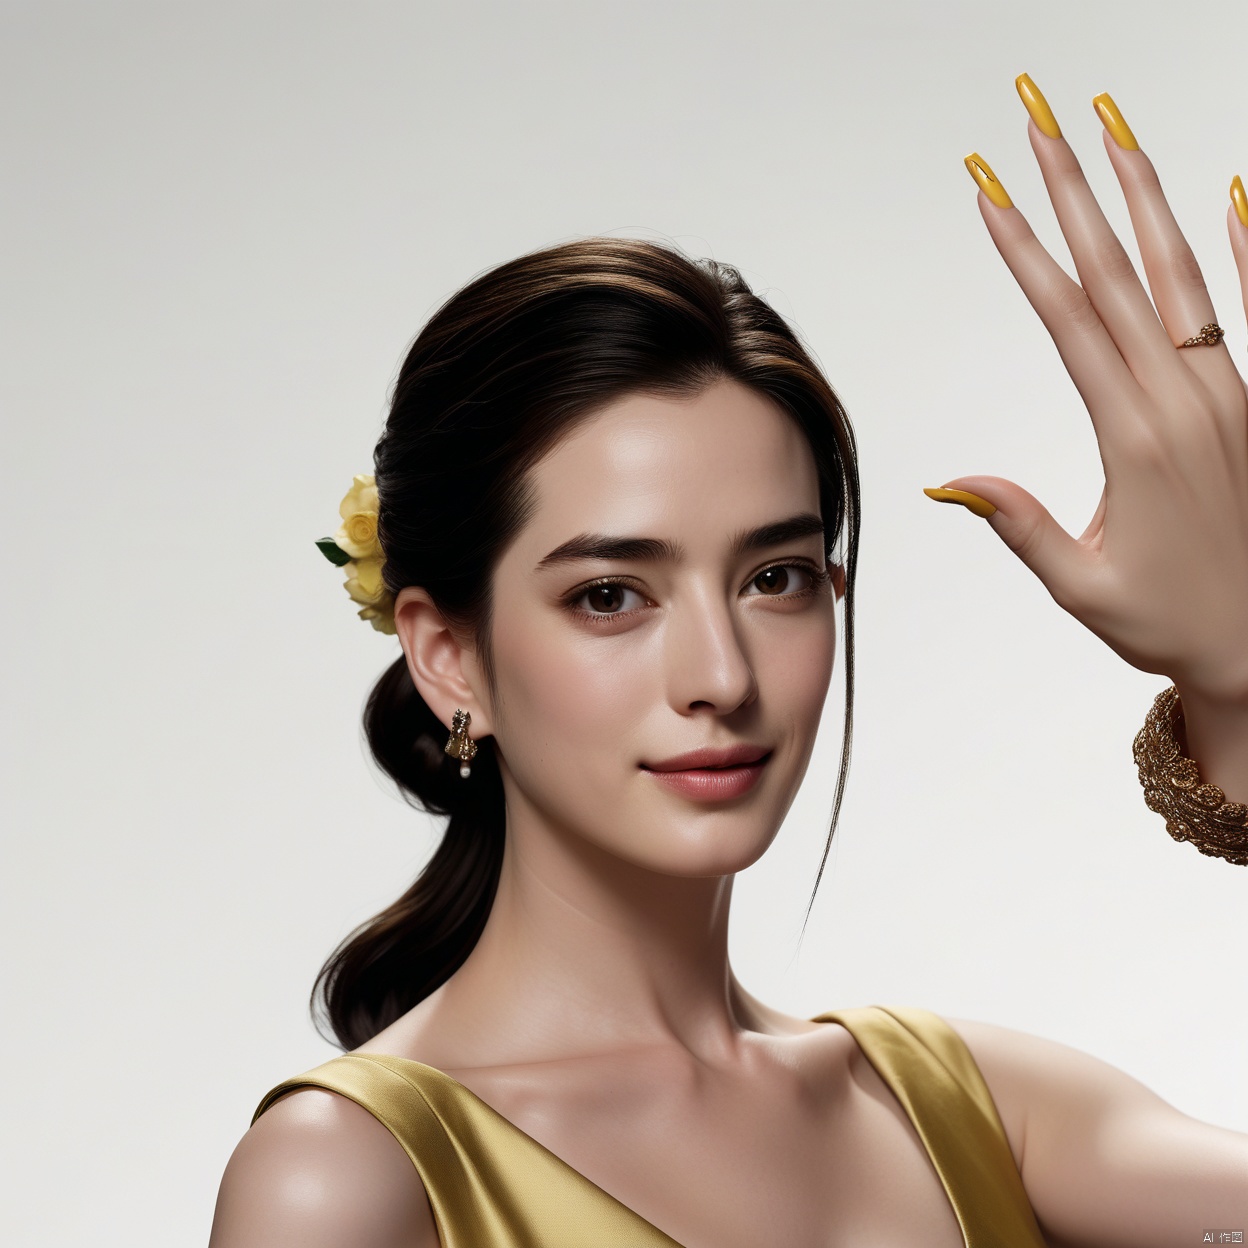  High quality full HD picture,1girl,(((Realistic skin texture))),(((Five Fingers))),
(18 years old:1.2), Fashionable dress,
yellow race,Asian,
Chinese people,HD quality, rich details, realistic photos, realistic style, clear facial features, complete facial features, complete fingers, straight nose, bright eyes, slim, slender,willowy
 MAJICMIX STYLE,((poakl)), g007,moyou, hand101, Anne Hathaway, Jennifer Connelly, Dasha Taran, liu yifei